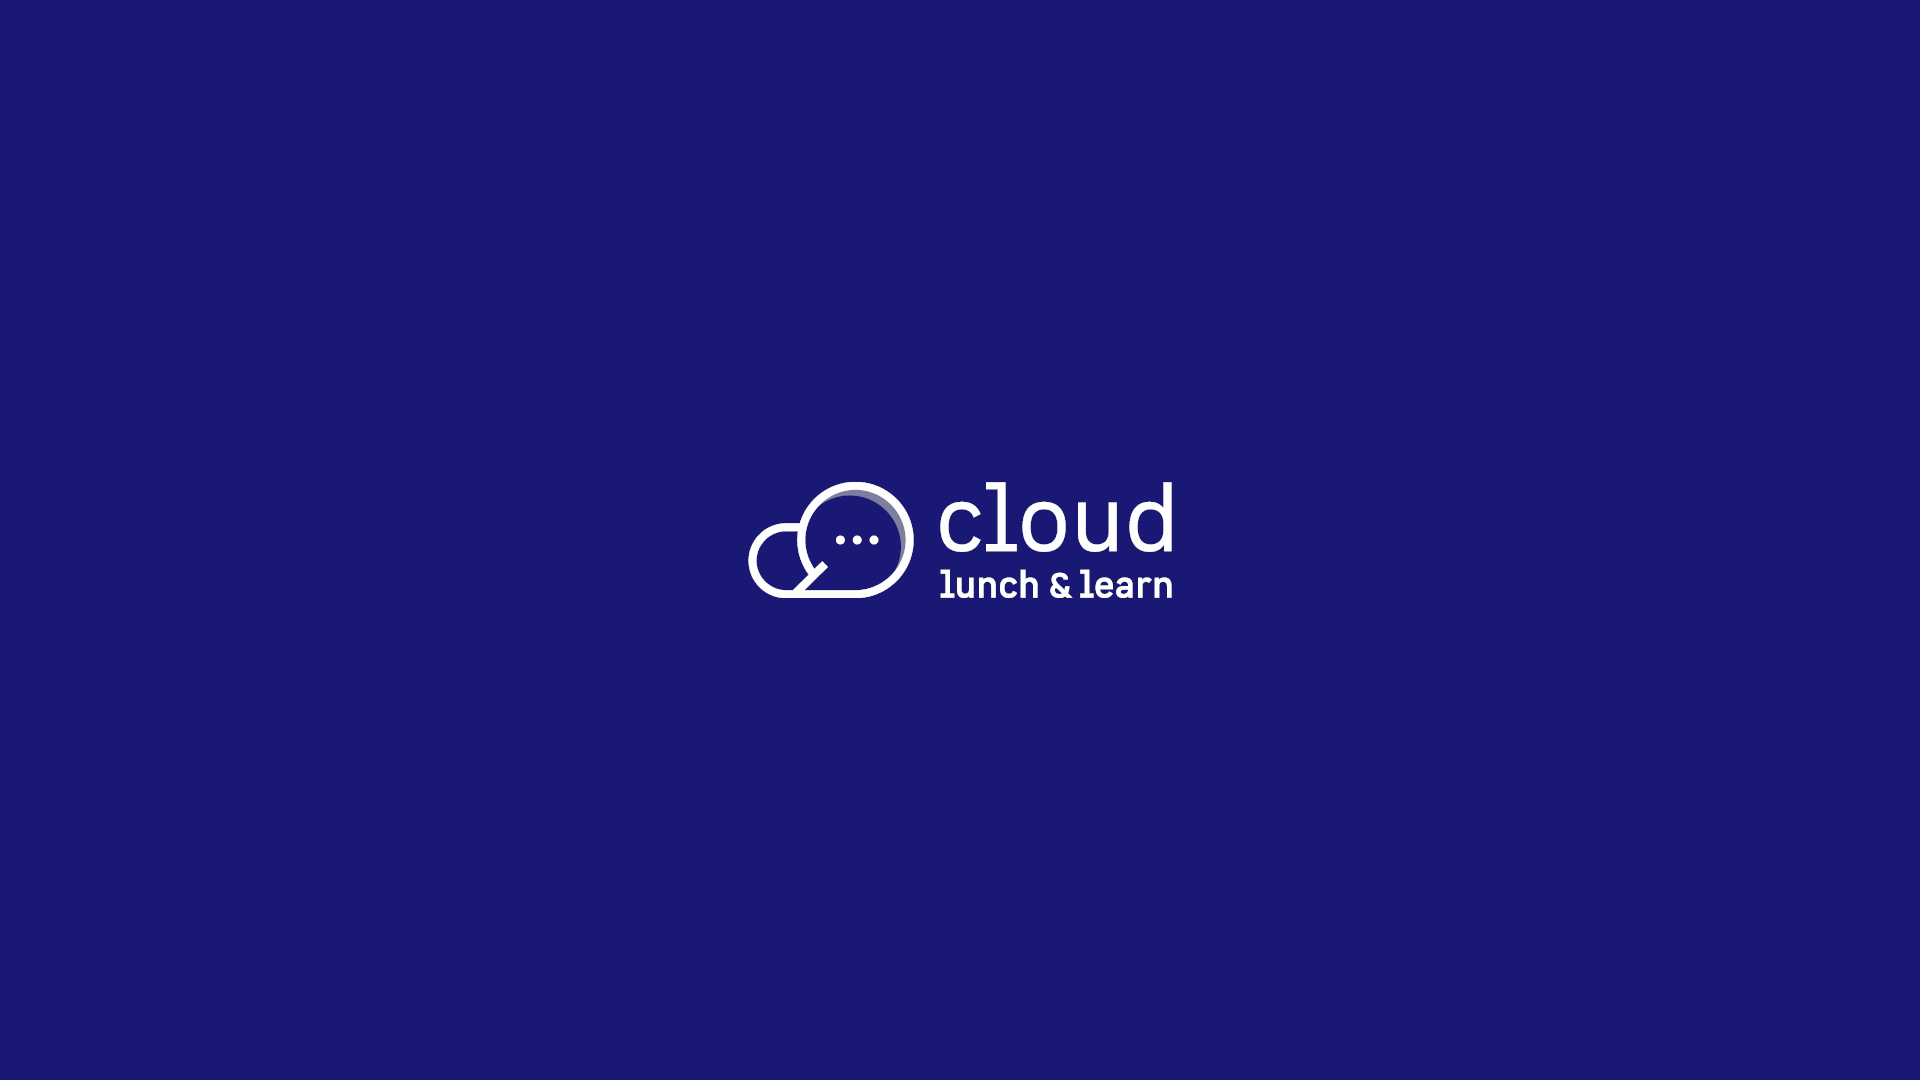 Cloud Lunch and Learn Marathon 2021 - Using Hugo, Azure Storage and Azure CDN for a cheap & performant site on Azure